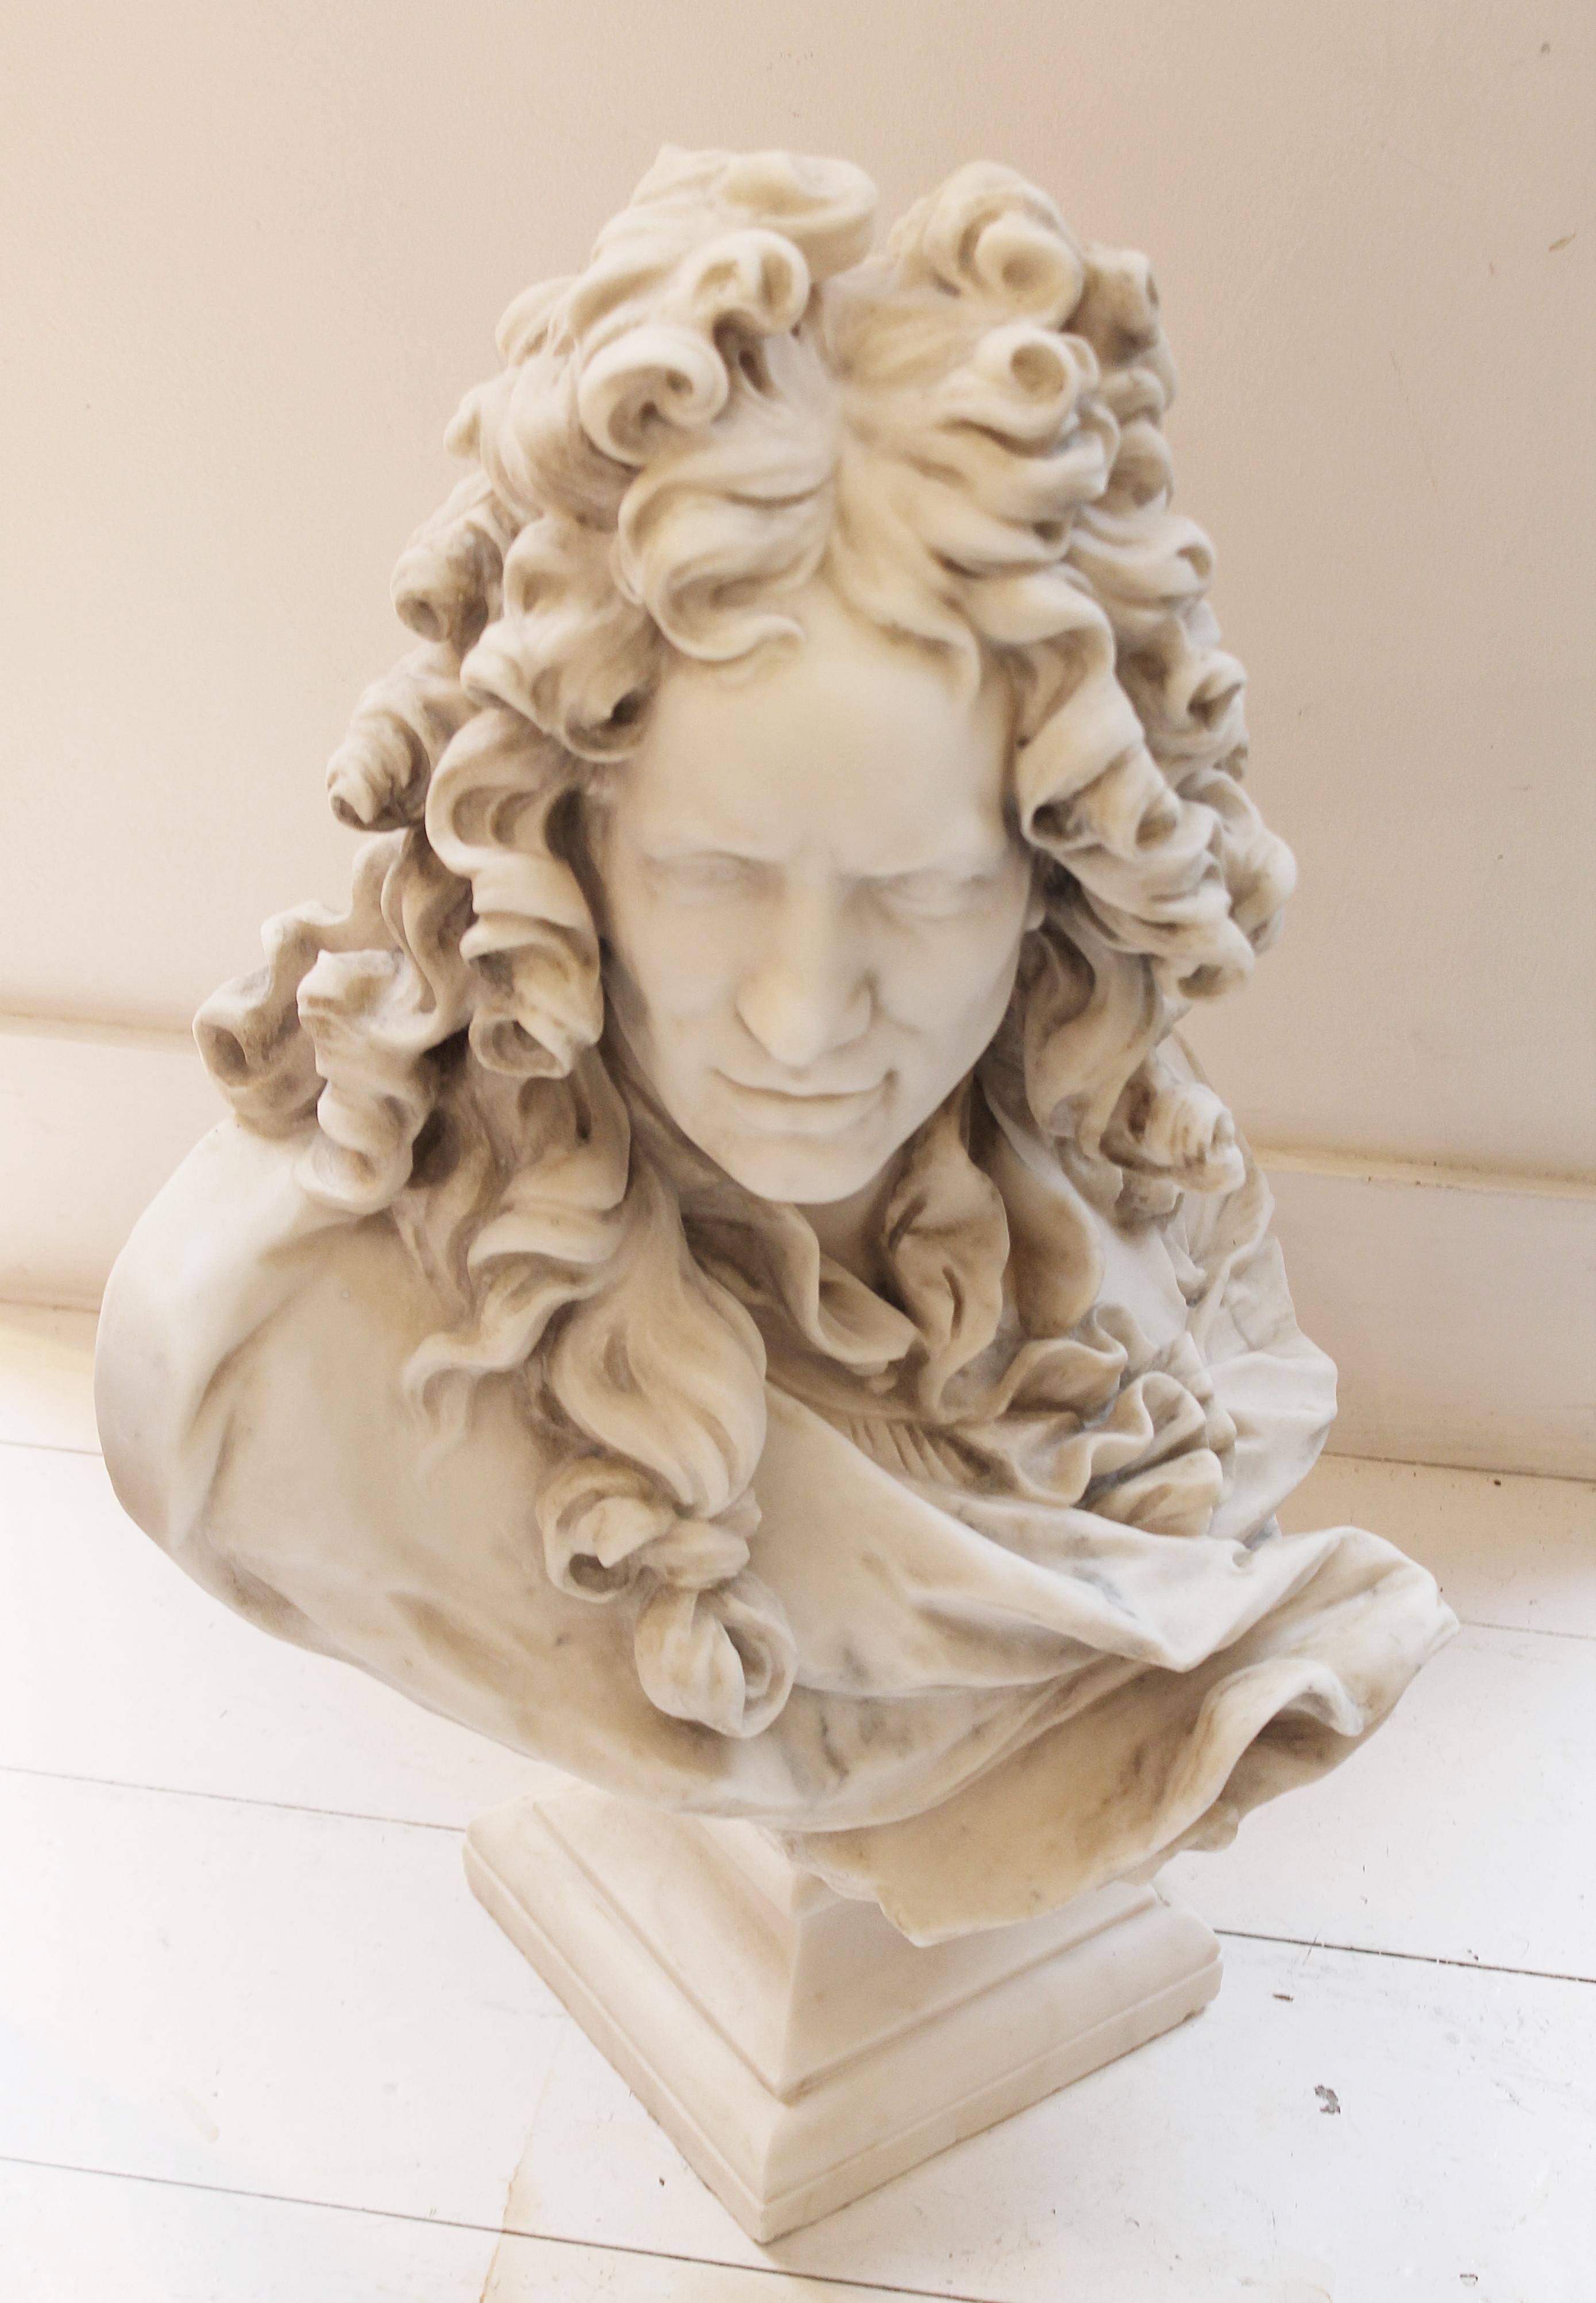 Marble bust of Corneille Van Cleve by Jean-Jacques Caffieri, Belgium, 19th century.